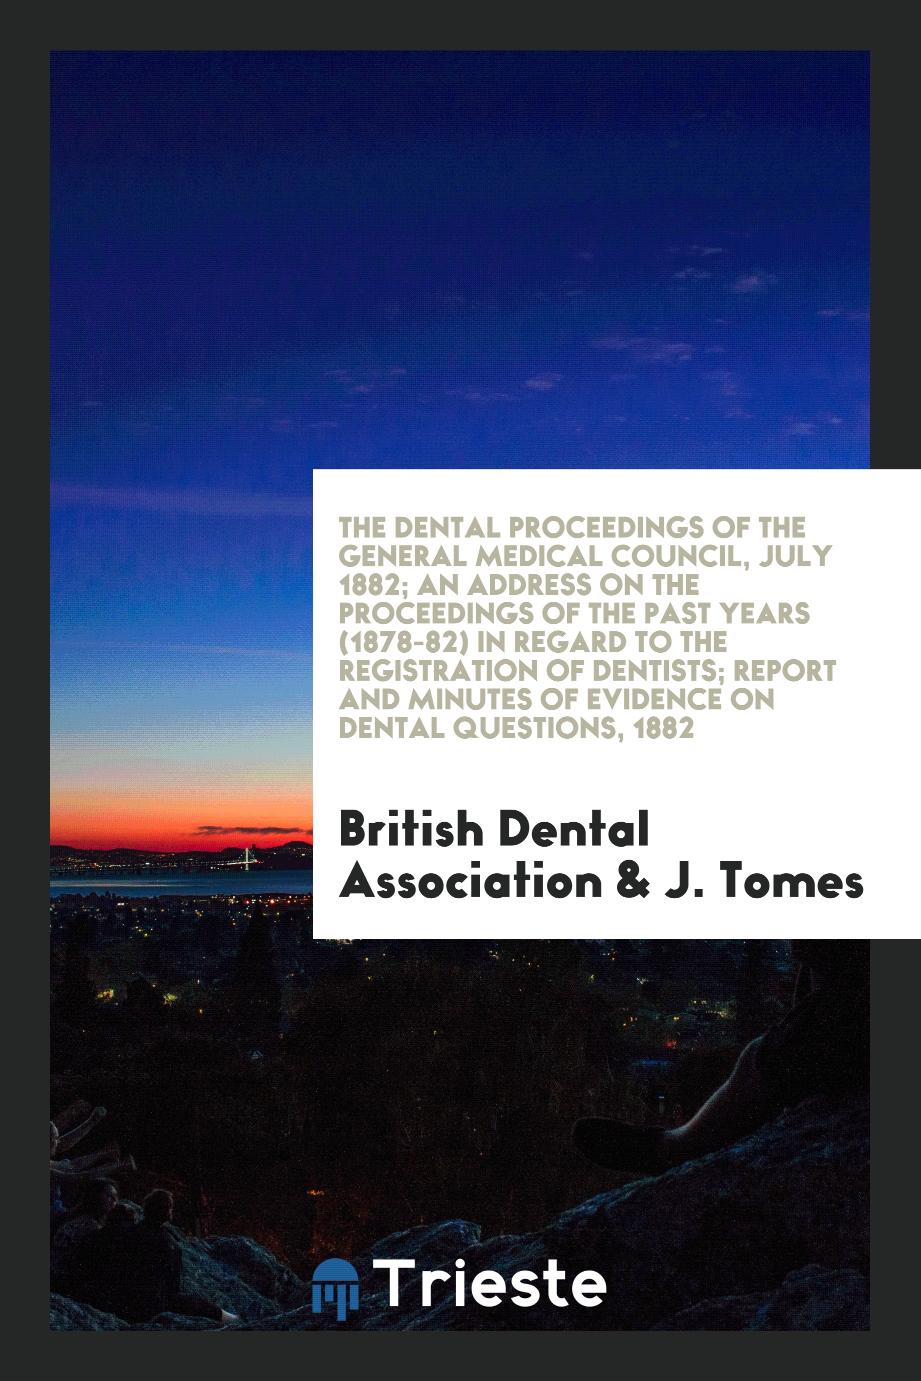 The Dental Proceedings of the General Medical Council, July 1882; An Address on the Proceedings of the Past Years (1878-82) in Regard to the Registration of Dentists; Report and Minutes of evidence on Dental Questions, 1882